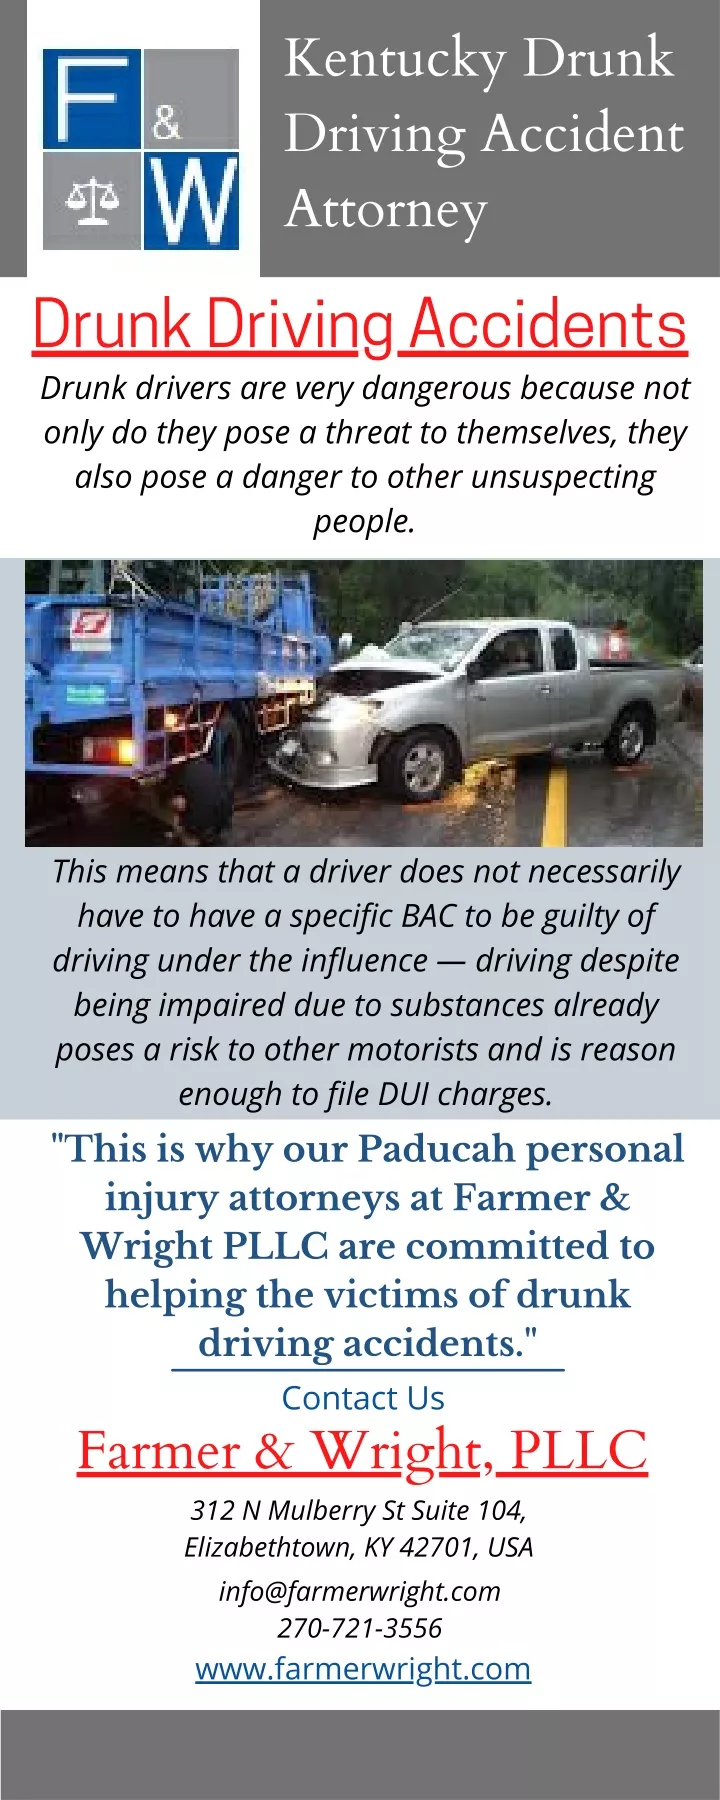 kentucky drunk driving accident attorney